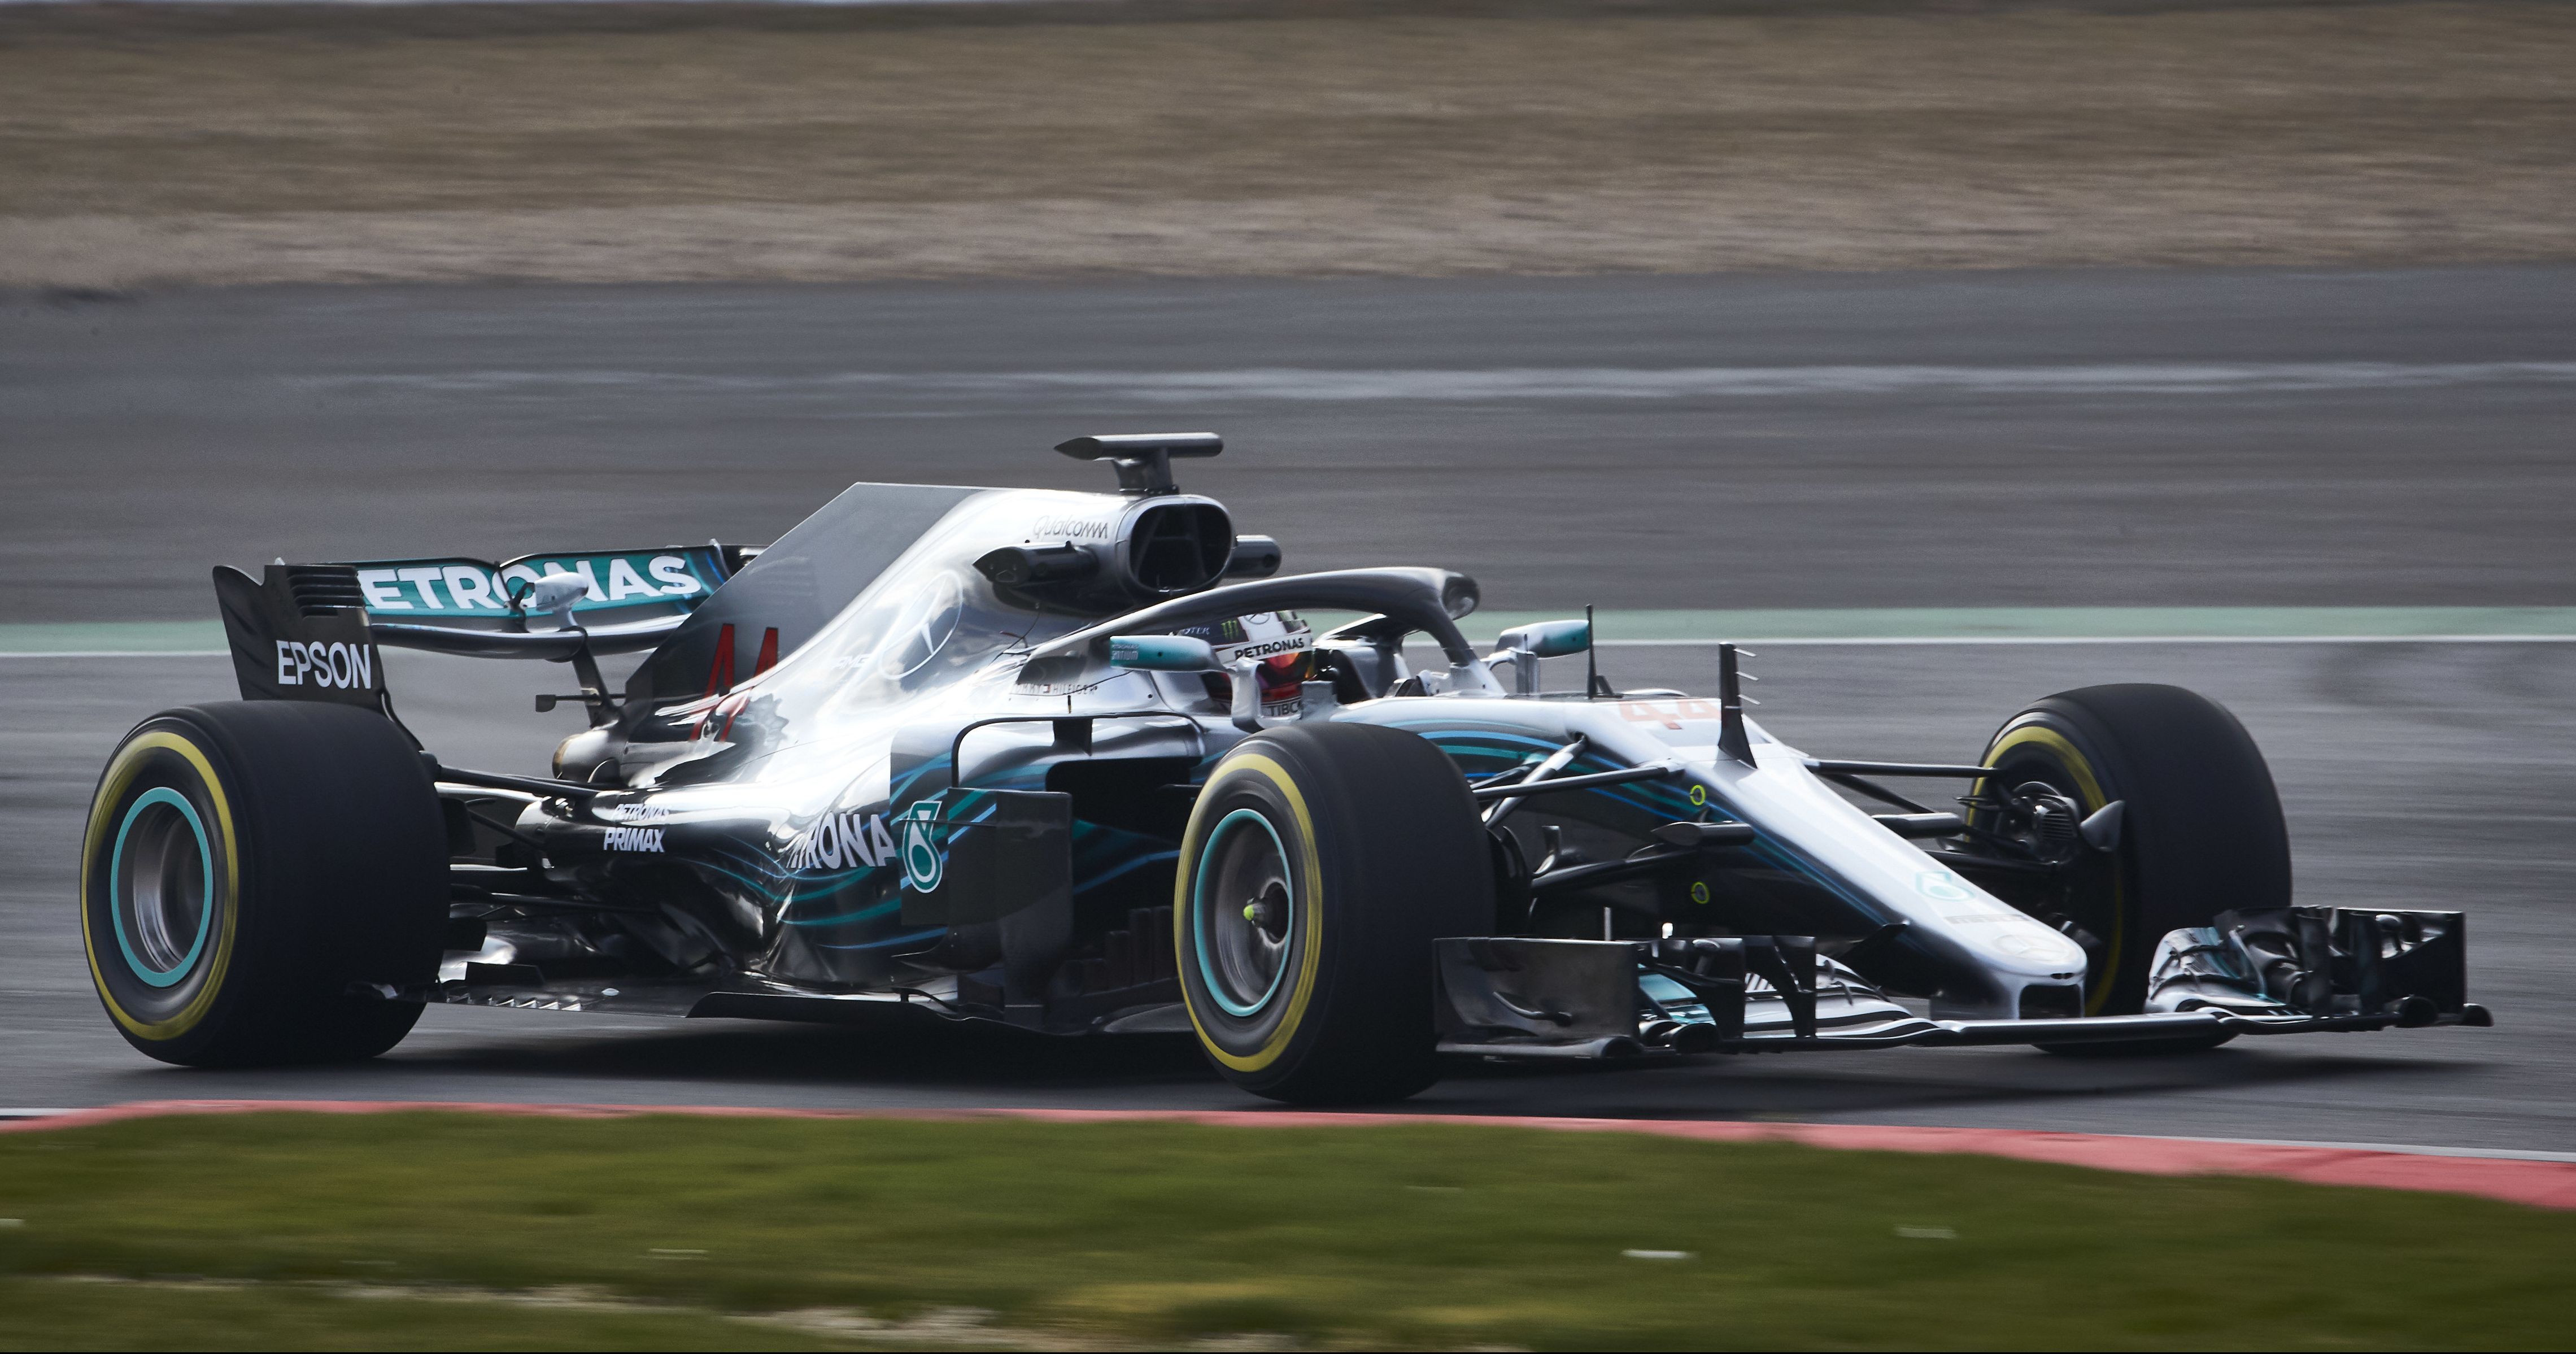 AD: PETRONAS and the Mercedes AMG PETRONAS team in Formula 1 – pushing forward together for you